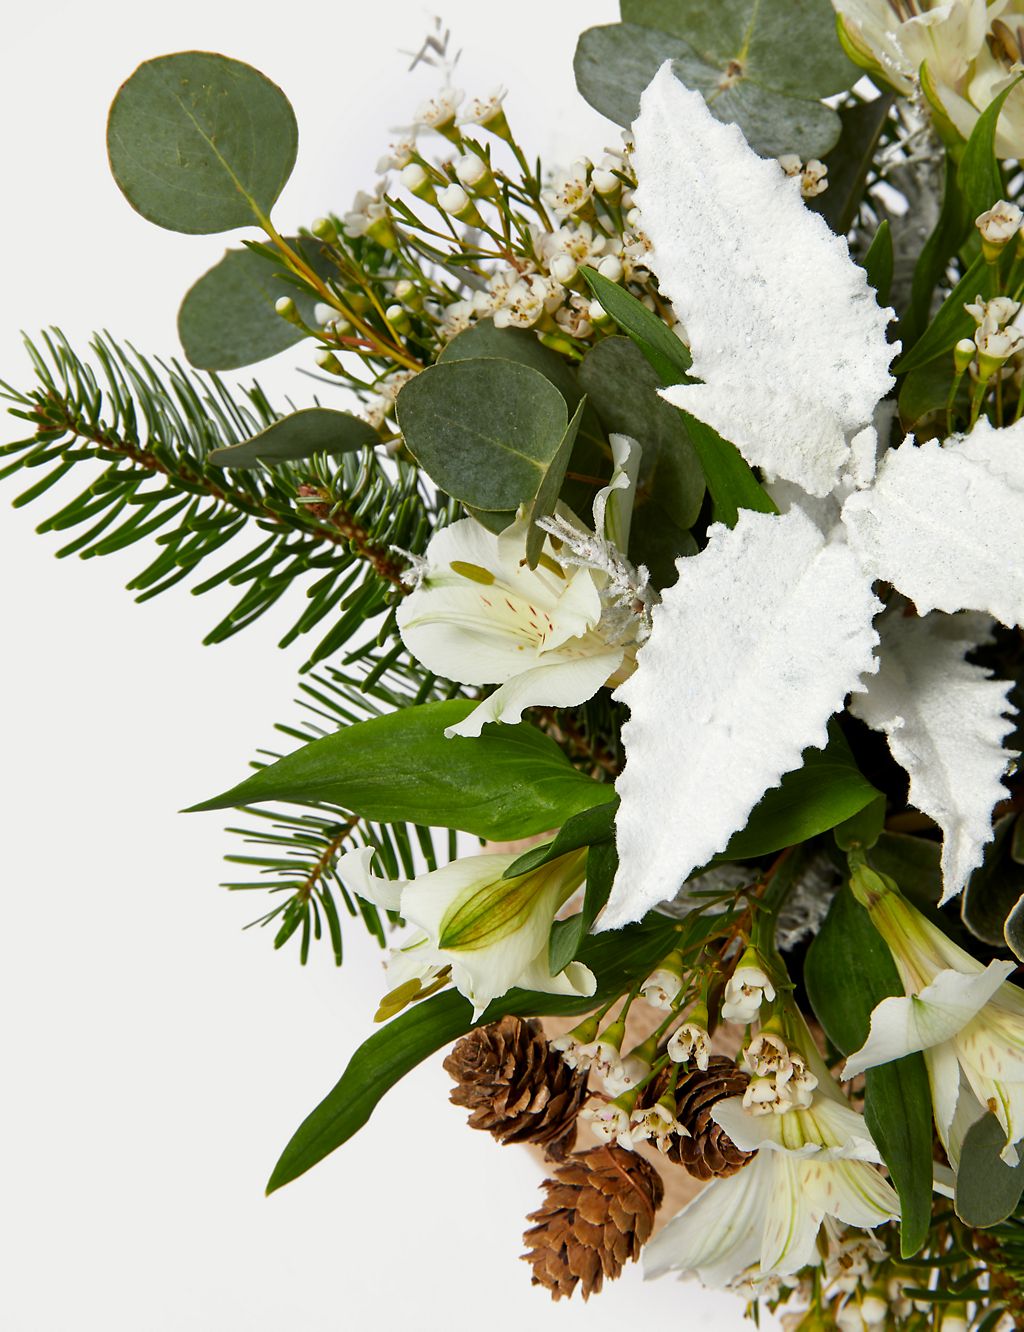 Create Your Own Christmas Table Arrangement 7 of 7